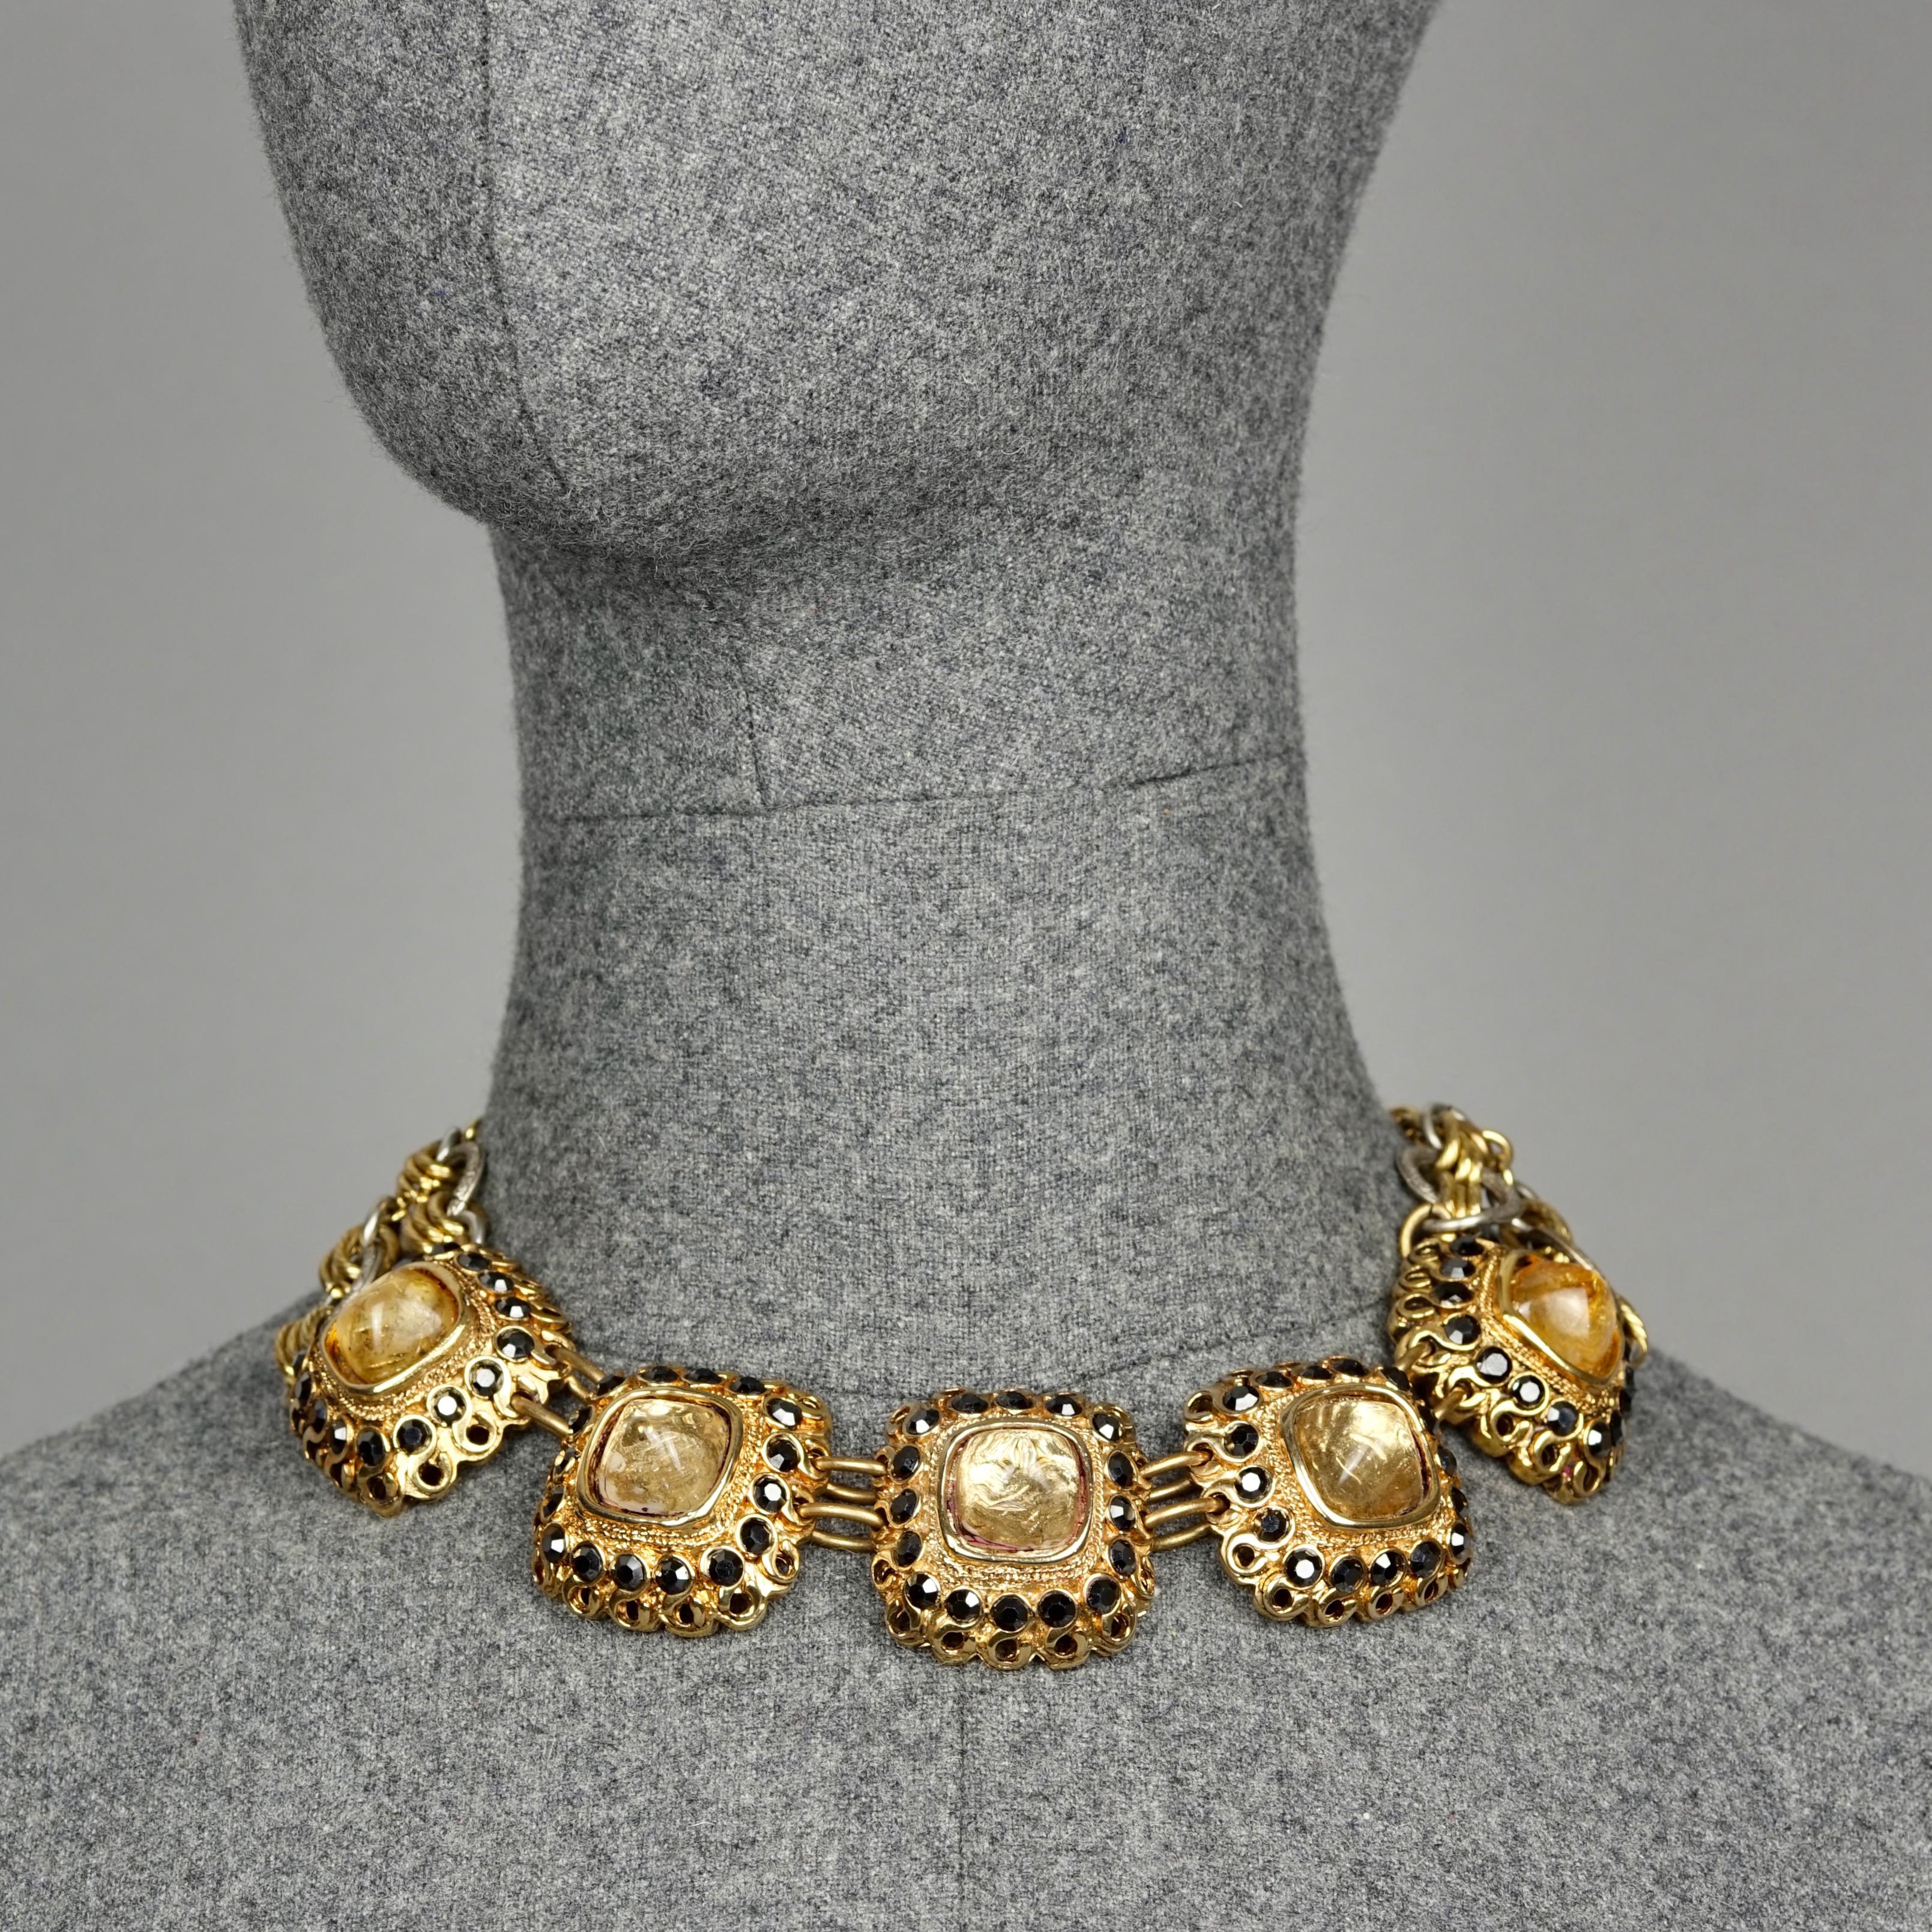 Vintage CLAIRE DEVE Jewelled Arabesque Chunky Necklace

Measurements:
Height: 1.37 inch (3.5 cm)
Wearable Length: 16.14 inches (41 cm) maximum

Features:
- 100% Authentic CLAIRE DEVE.
- Chunky Arabesque style necklace. with pointed glass cabochons